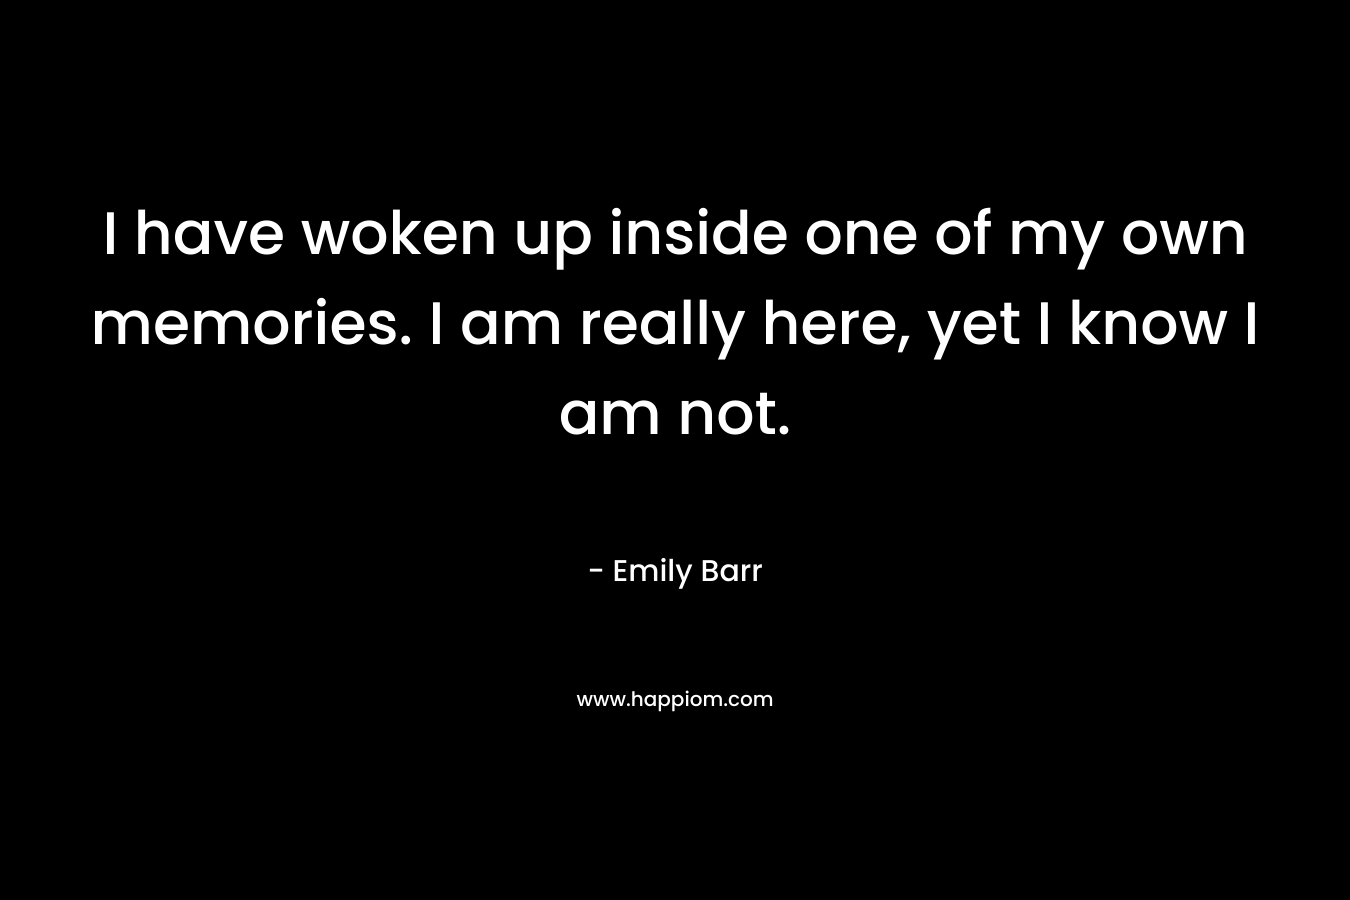 I have woken up inside one of my own memories. I am really here, yet I know I am not. – Emily Barr